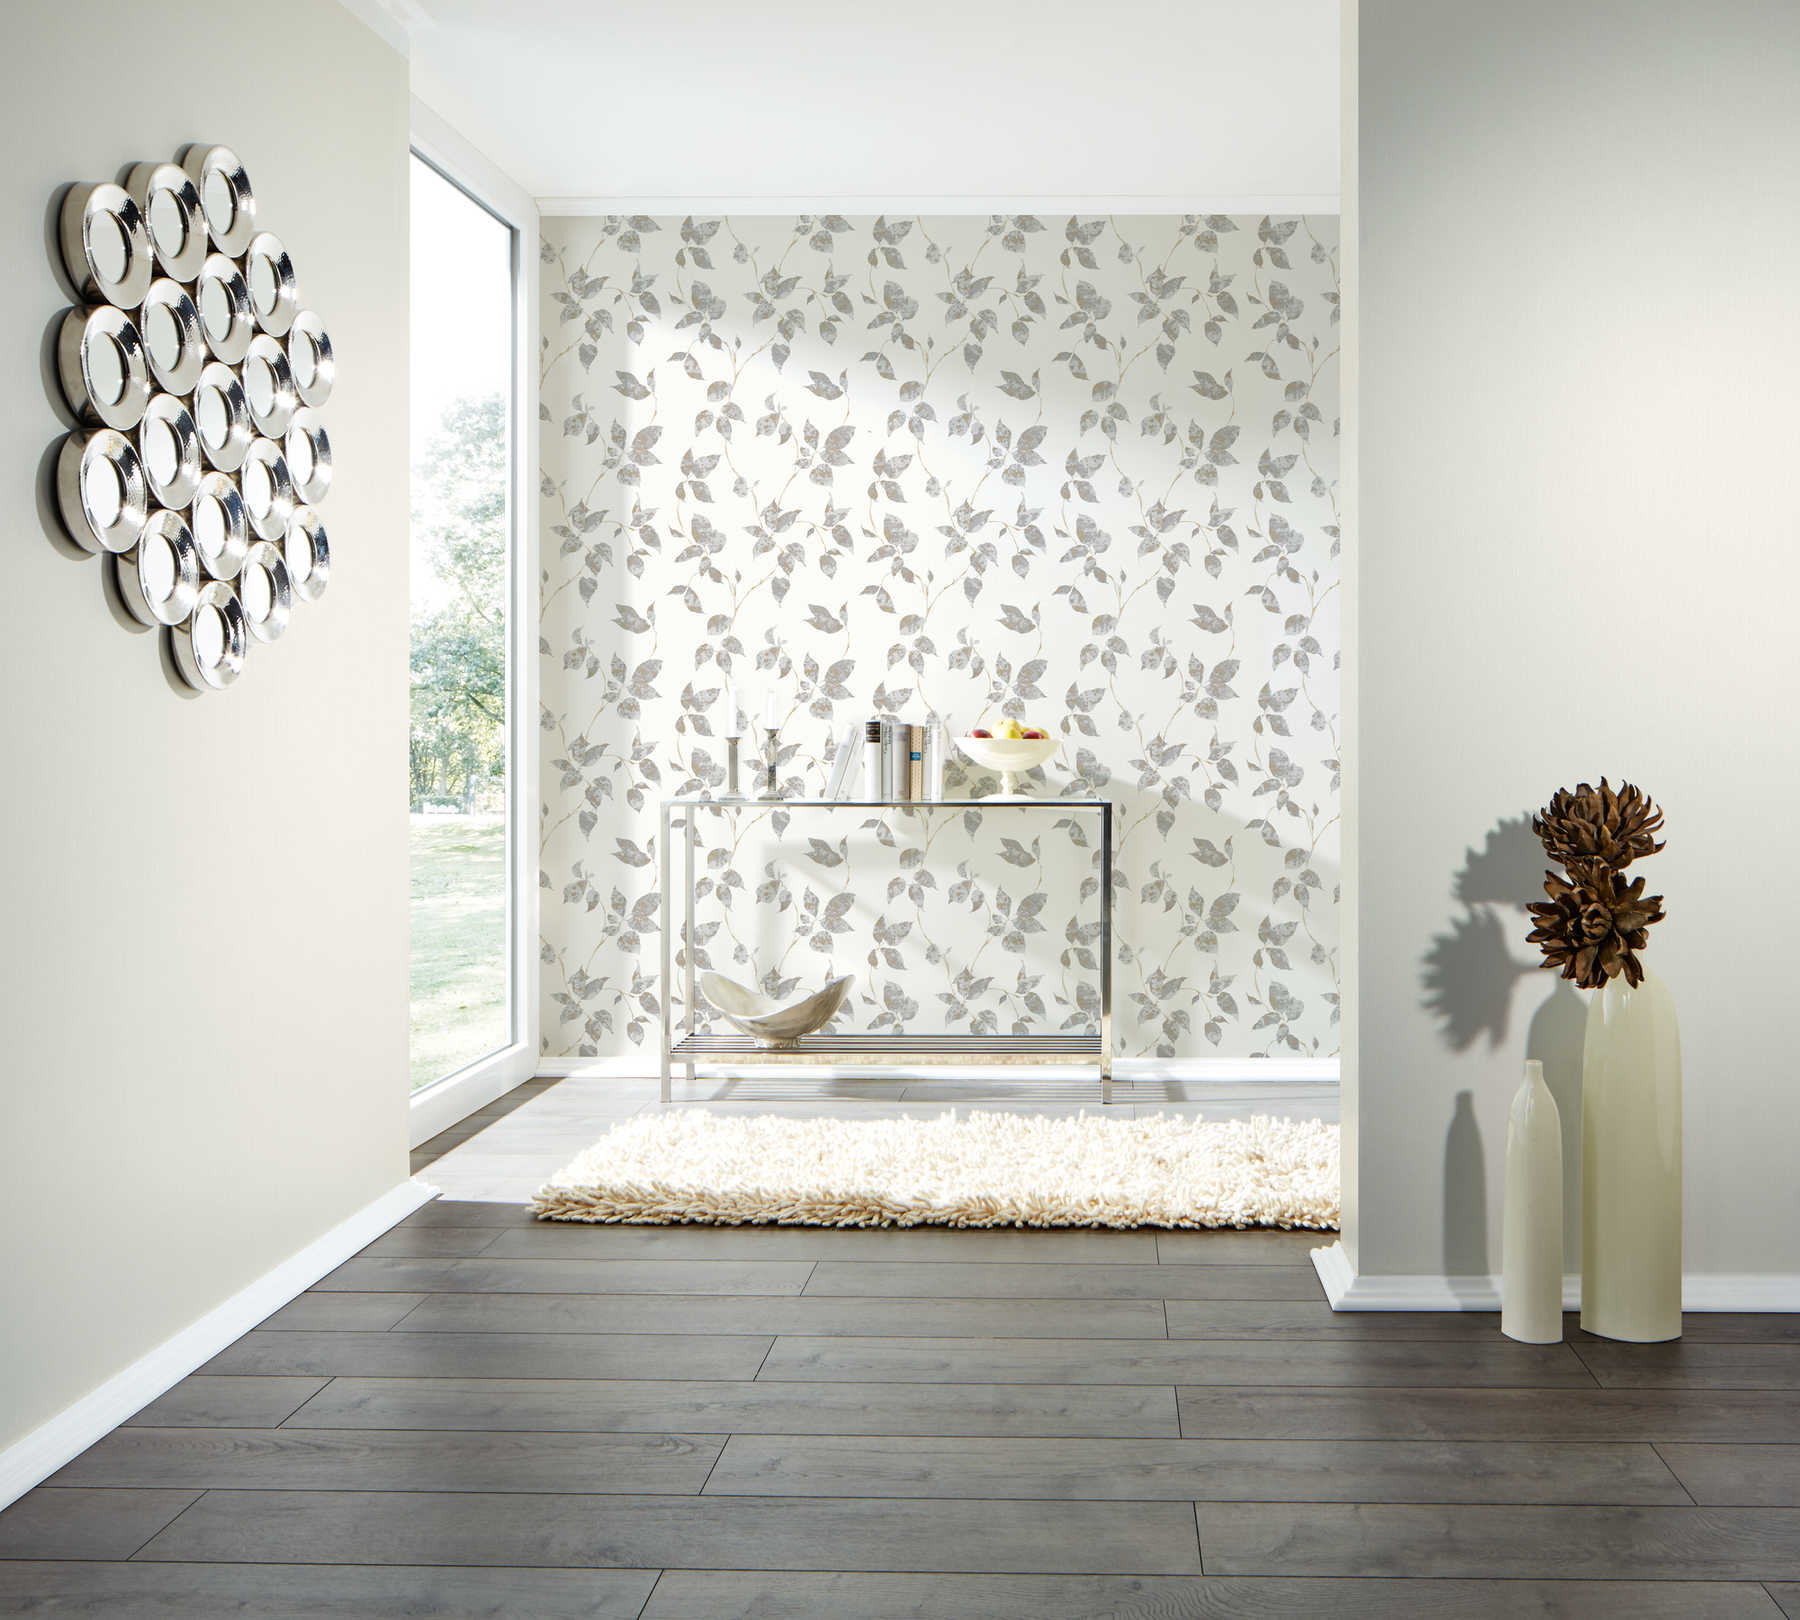             Country house wallpaper grey with texture effect & plaster look
        